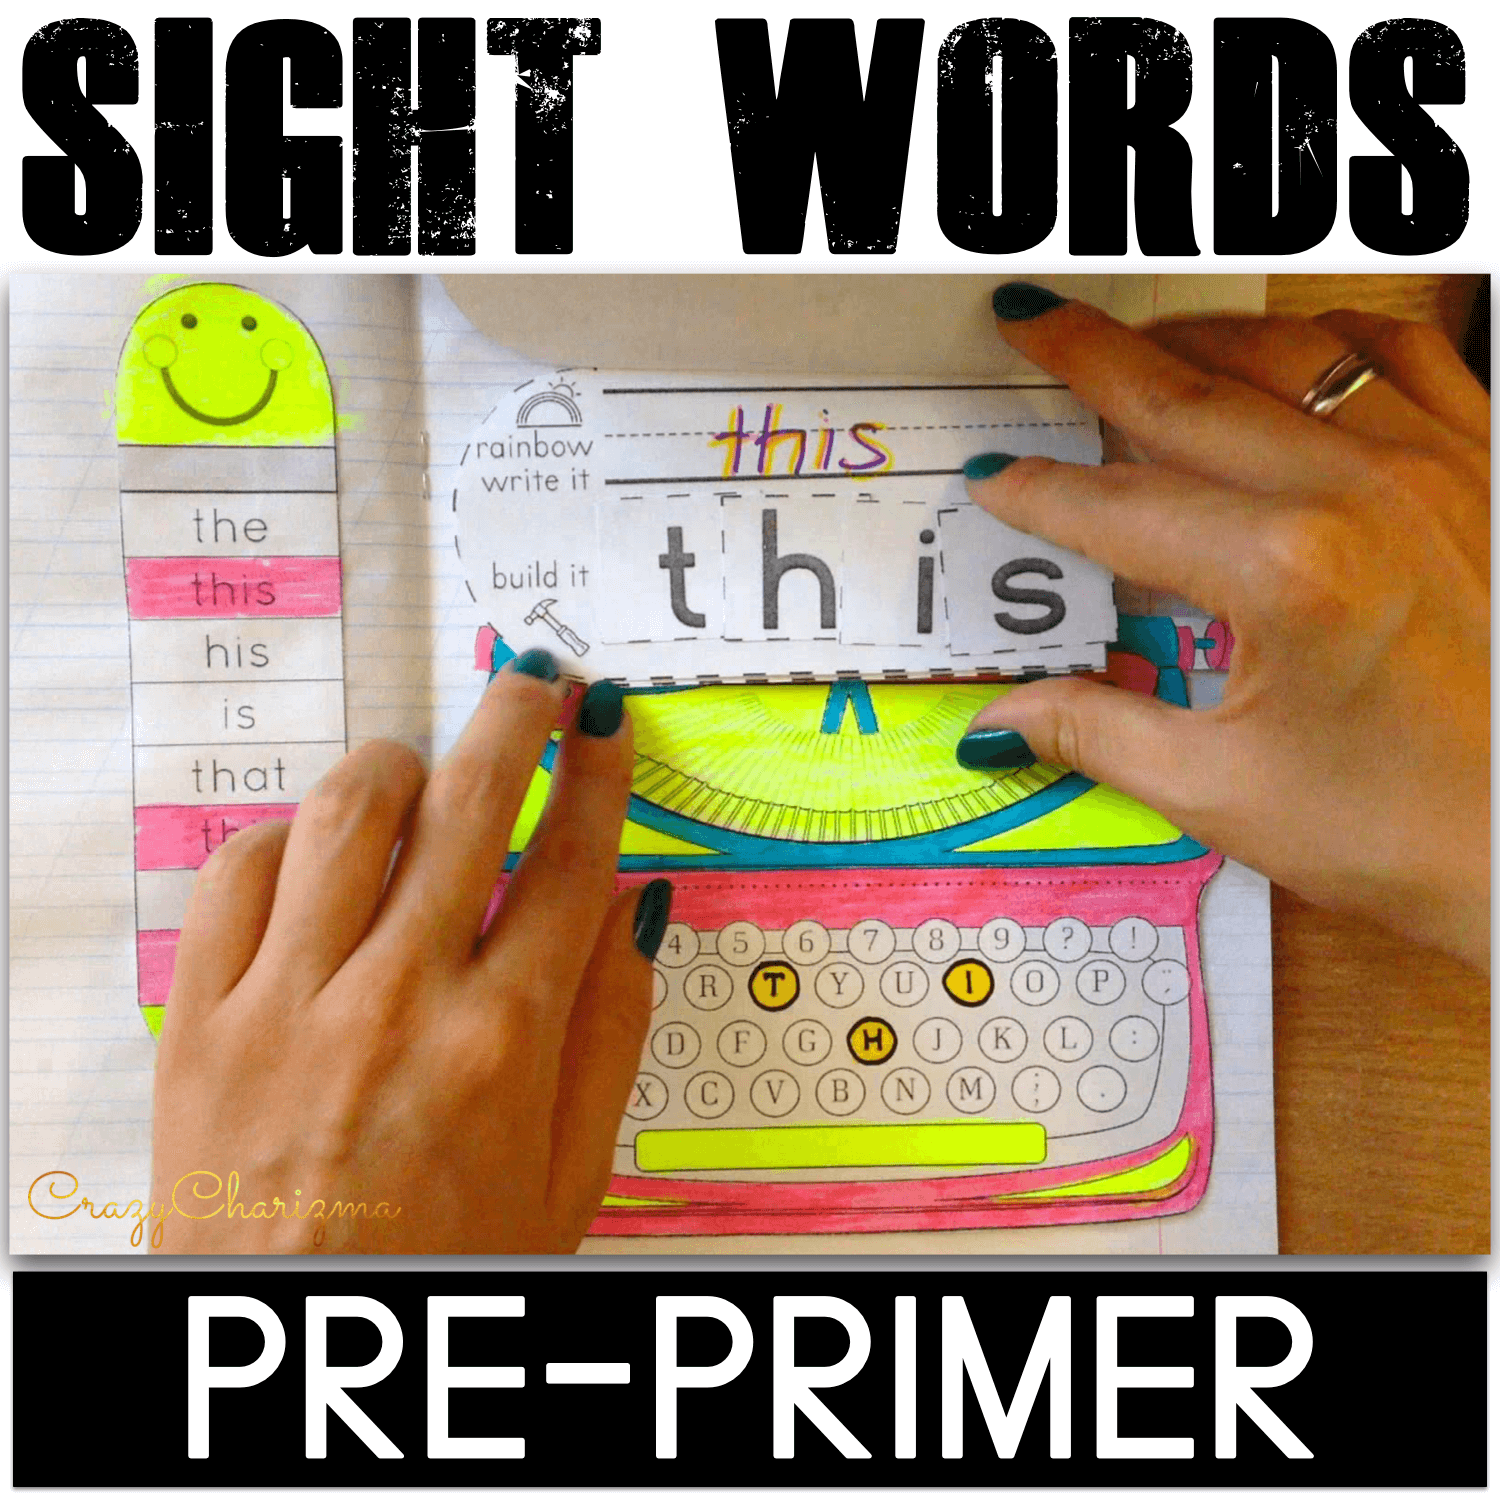 Need lots of activities to master sight words from pre-primer list? This set provides practice at the beginning reading level, and introduces 40 of the most common sight words. Kids will read more fluently and write with greater ease.